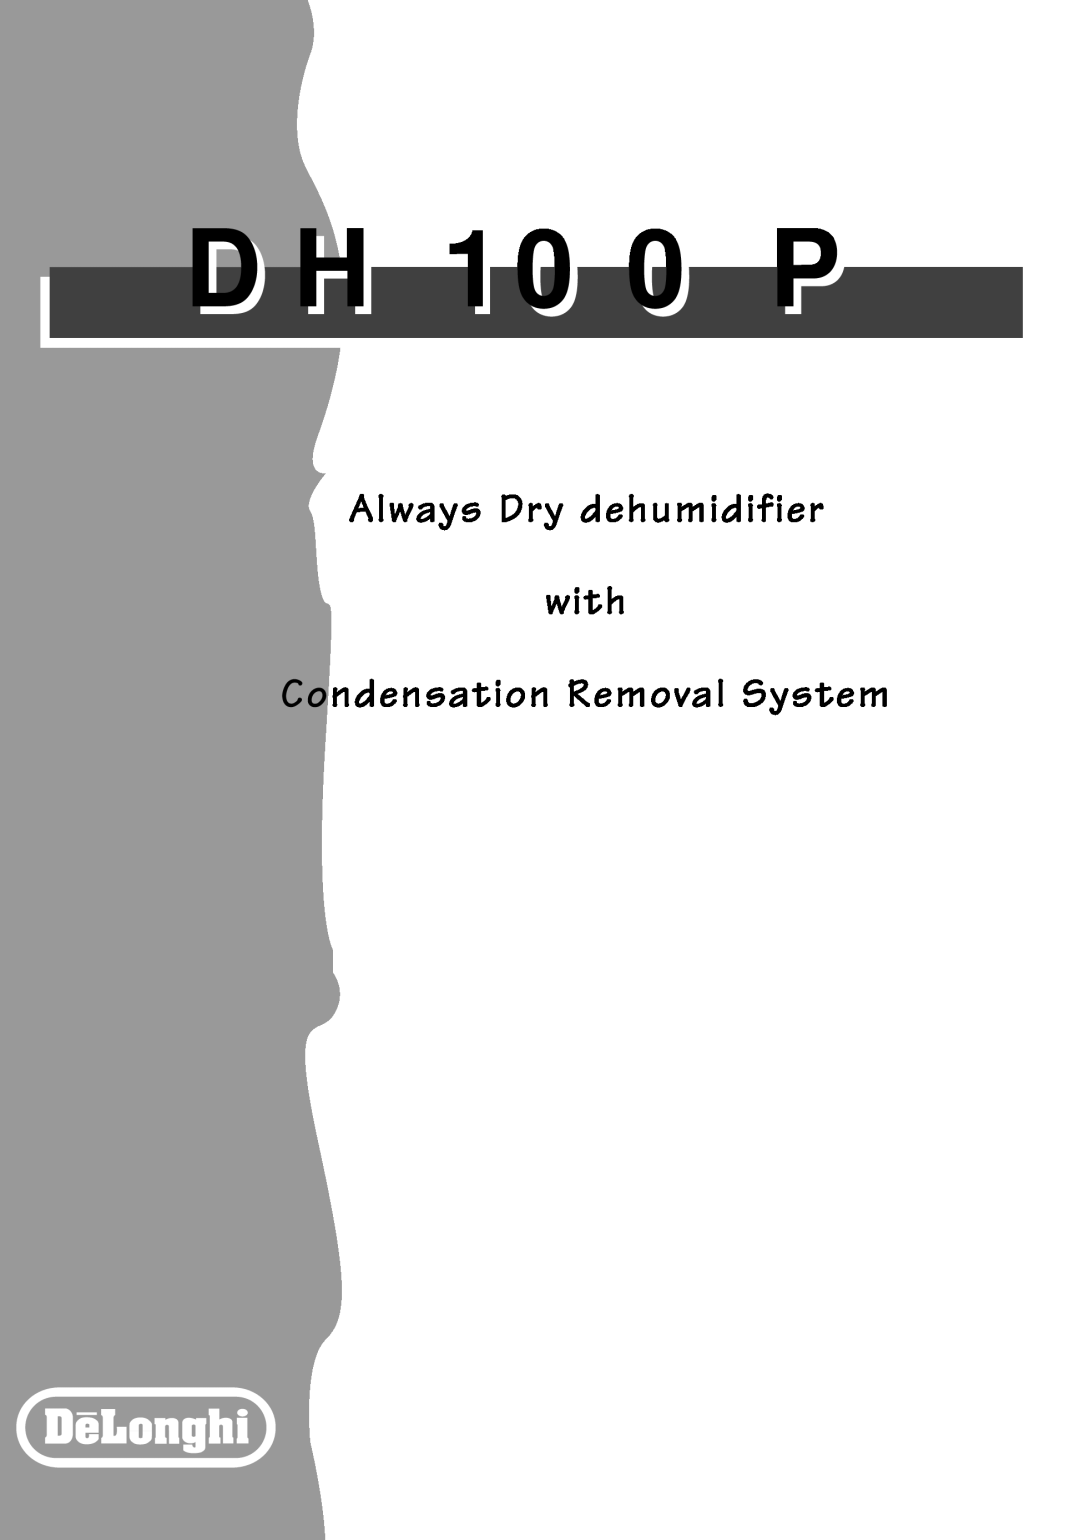 DeLonghi DH100P manual D H 1 0 0 P, Always Dry dehumidifier with, Condensation Removal System 